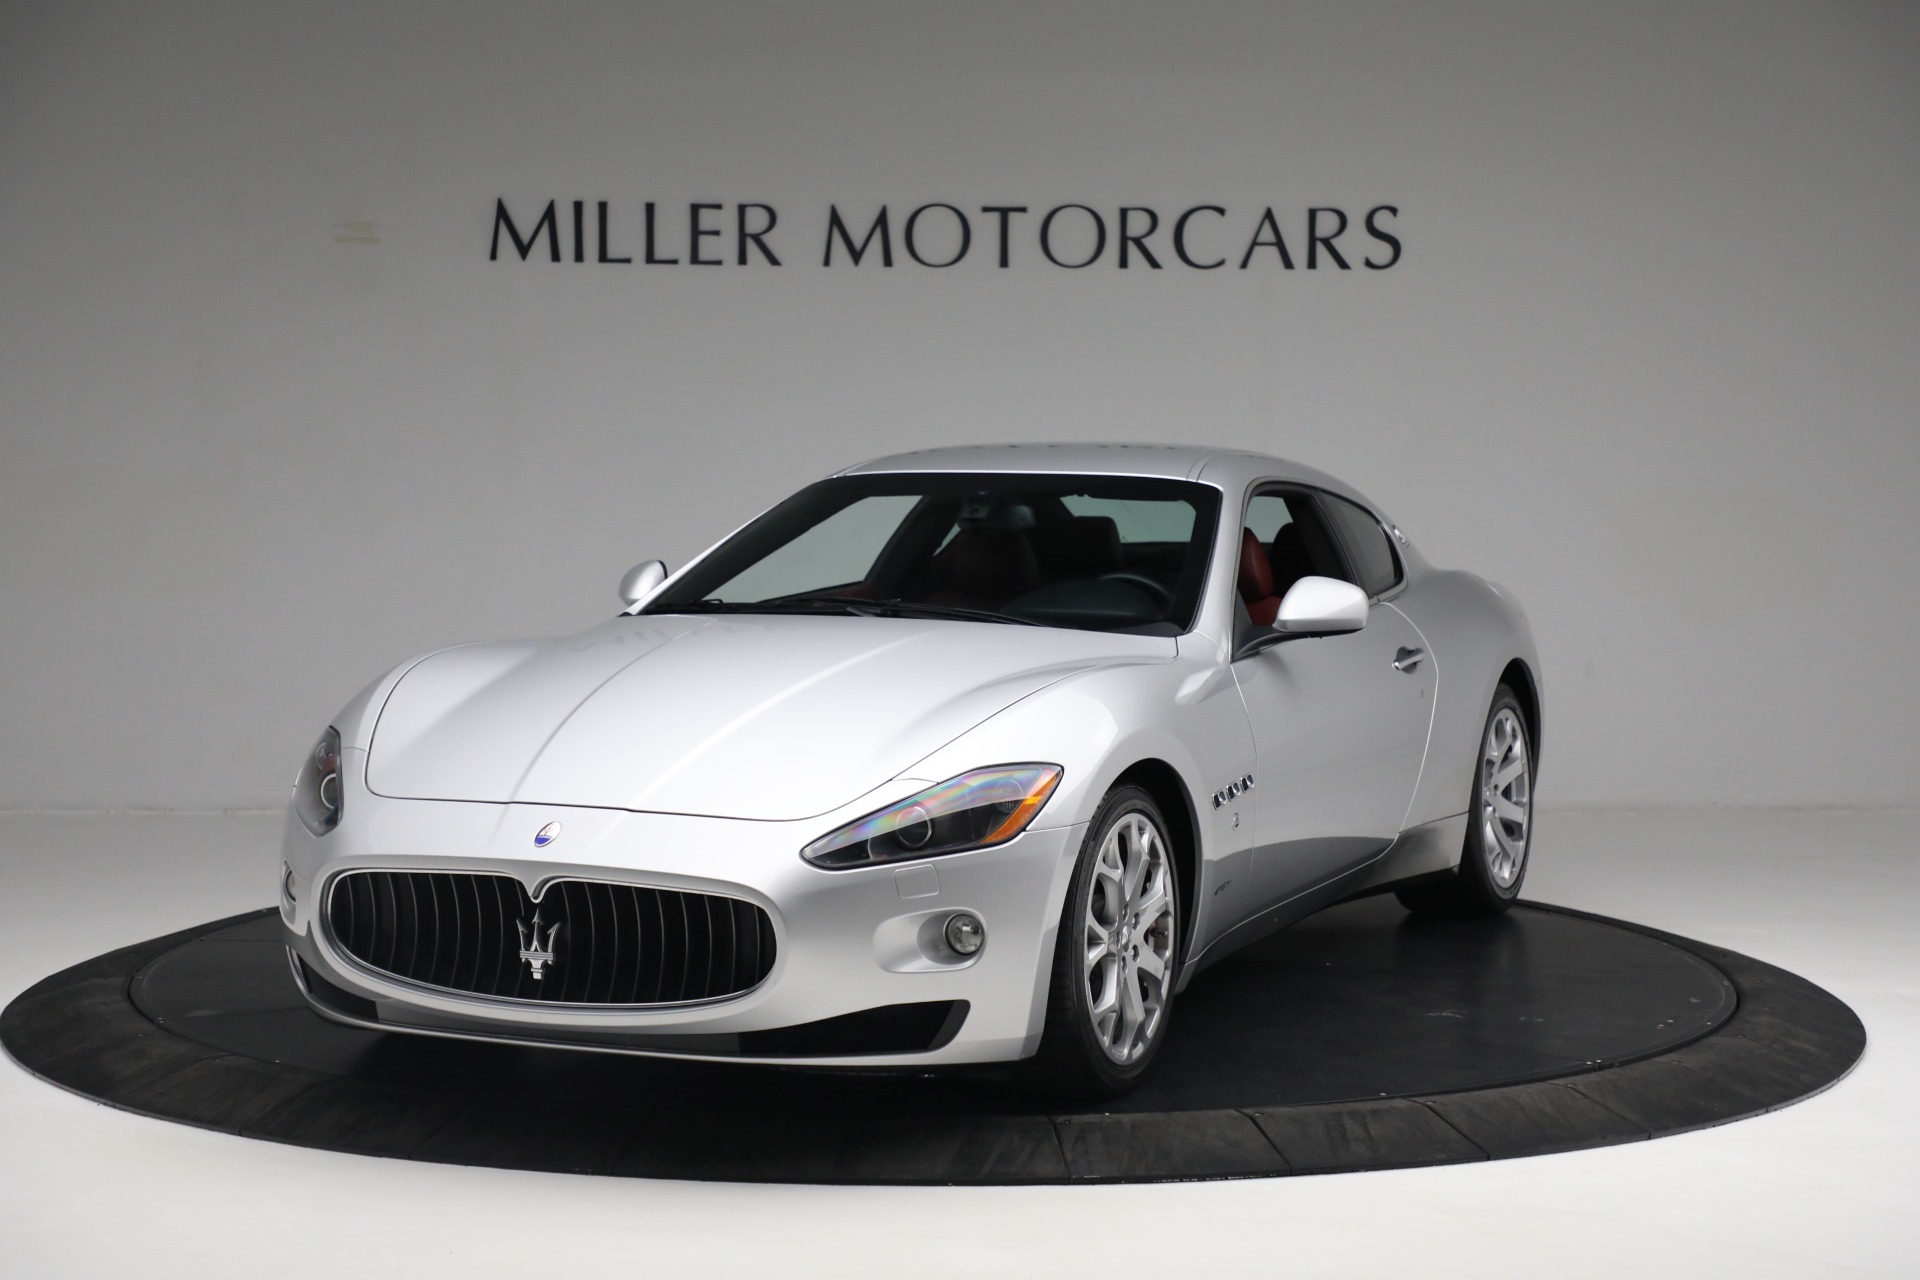 Used 2008 Maserati GranTurismo for sale $45,900 at Rolls-Royce Motor Cars Greenwich in Greenwich CT 06830 1